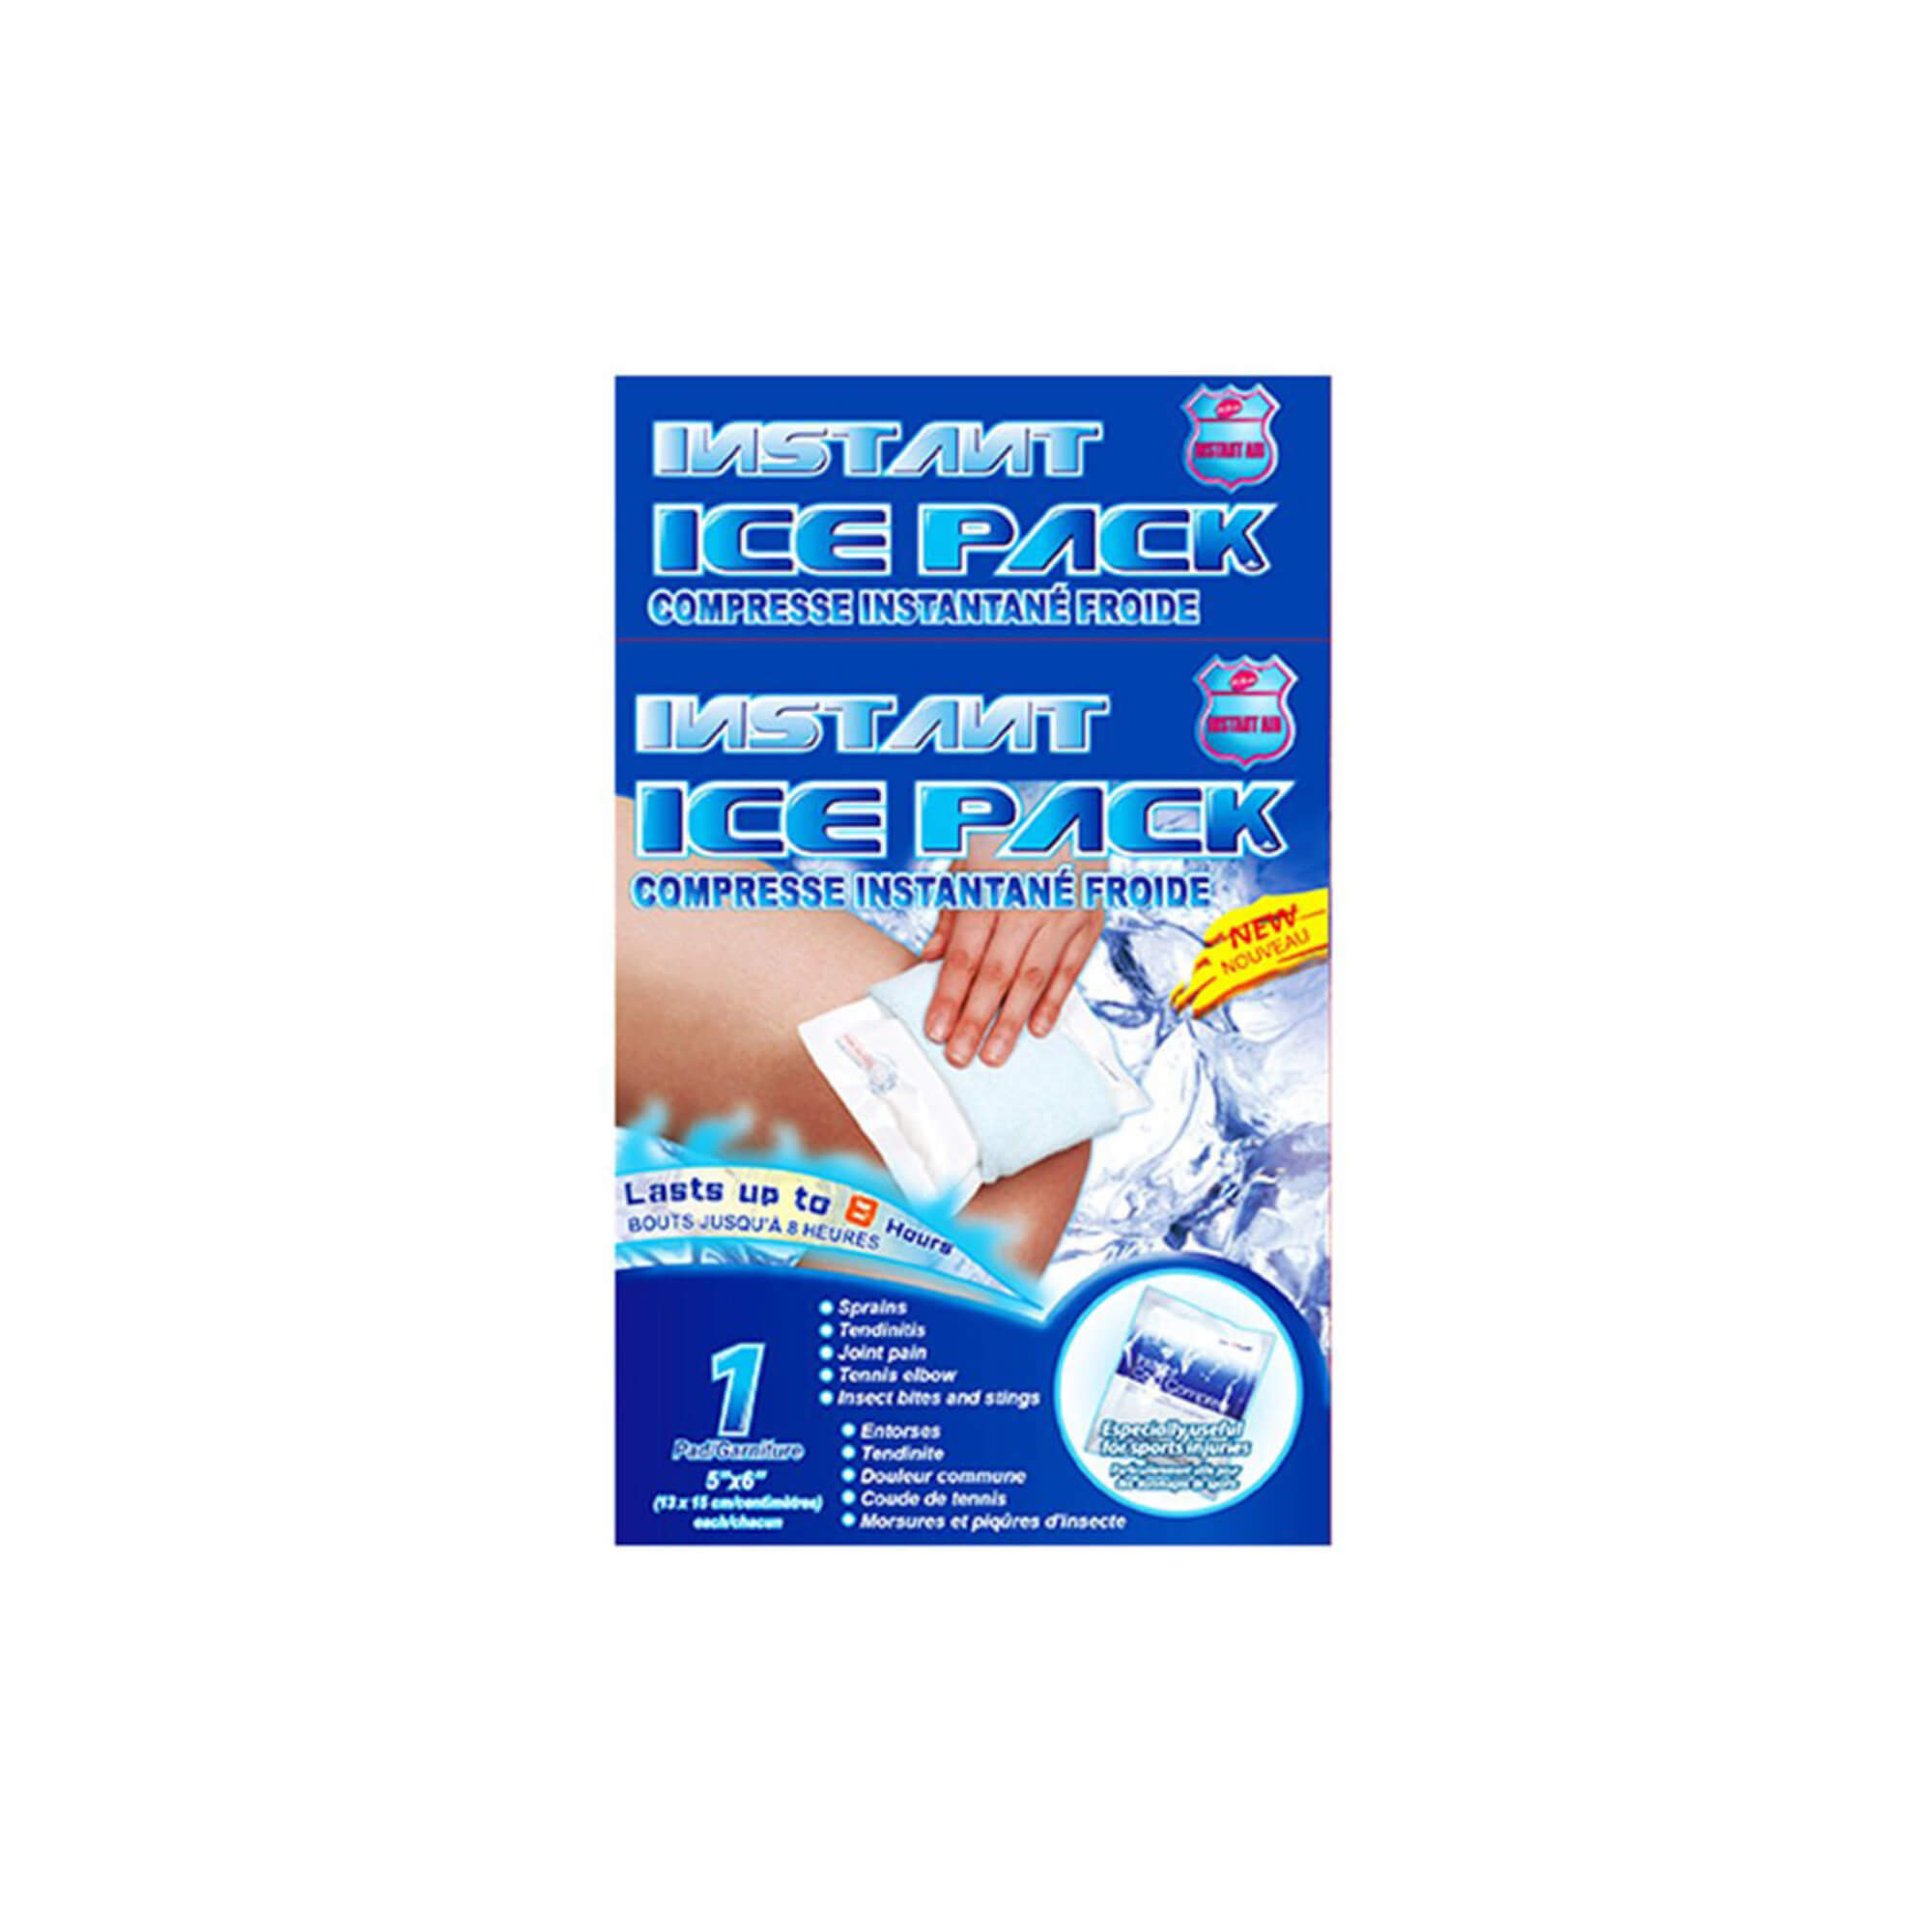 Purest Instant Aid- Instant Ice Pack